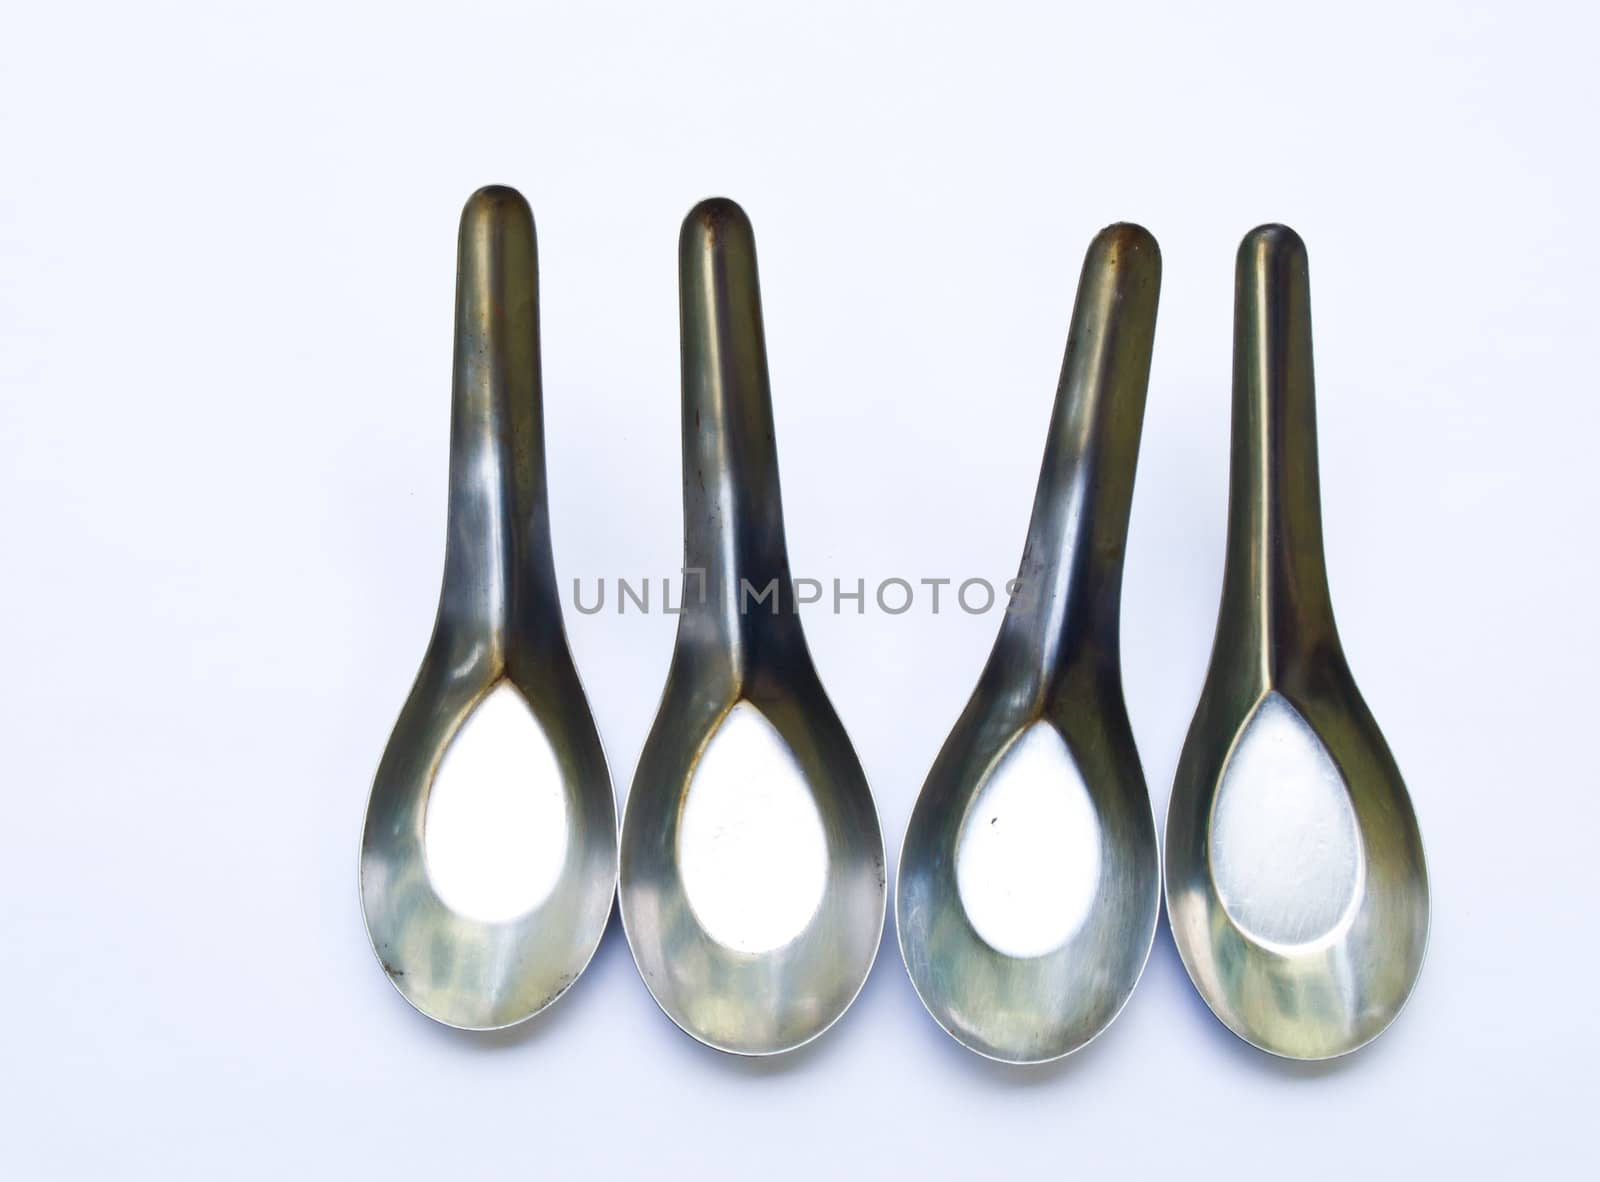 Used stainless stell spoons isolated on white background